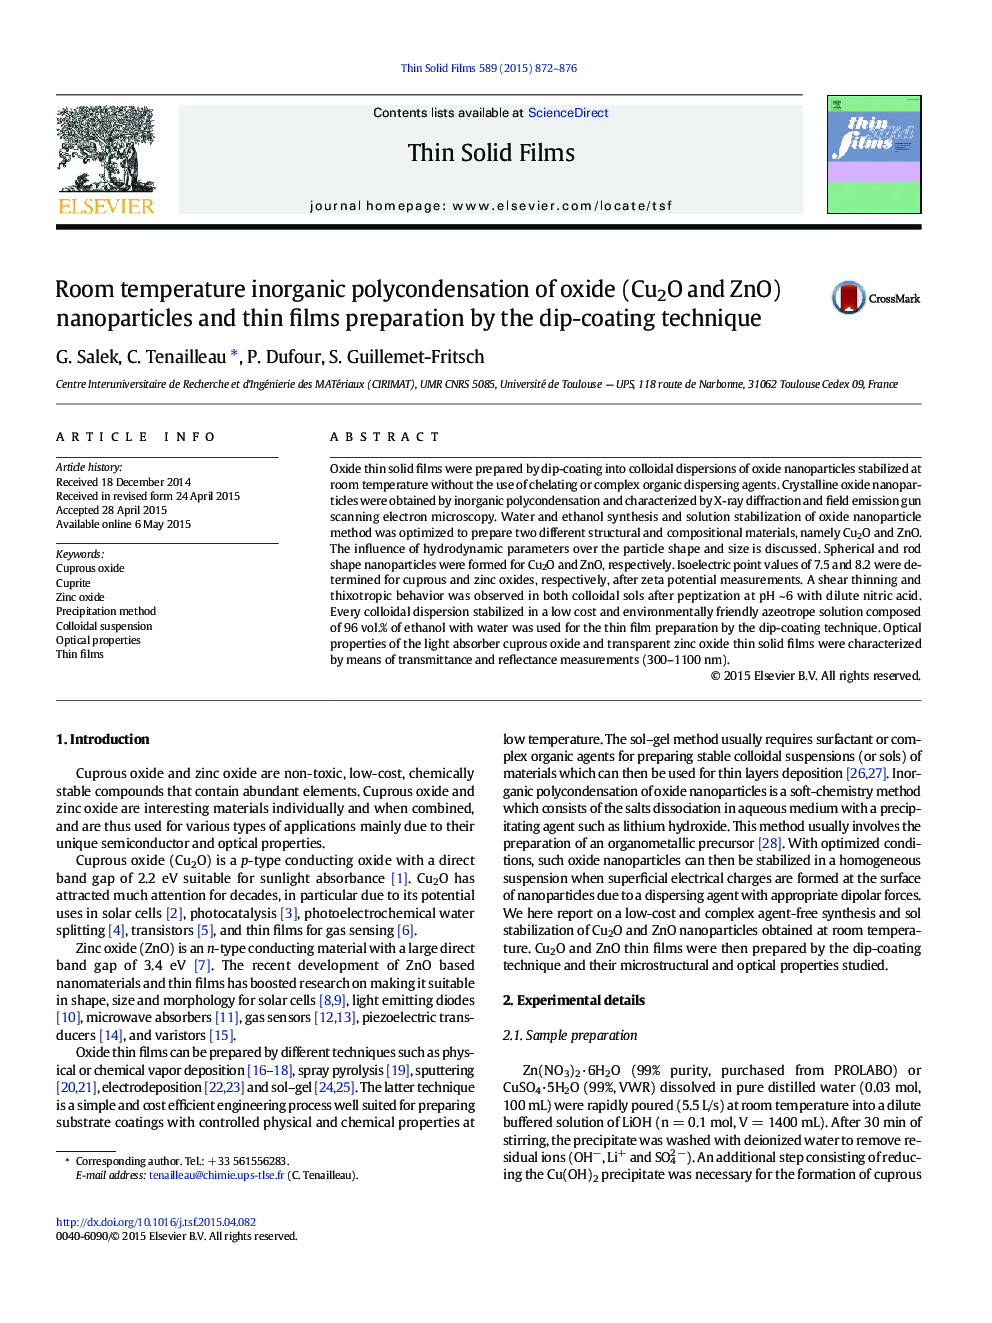 Room temperature inorganic polycondensation of oxide (Cu2O and ZnO) nanoparticles and thin films preparation by the dip-coating technique